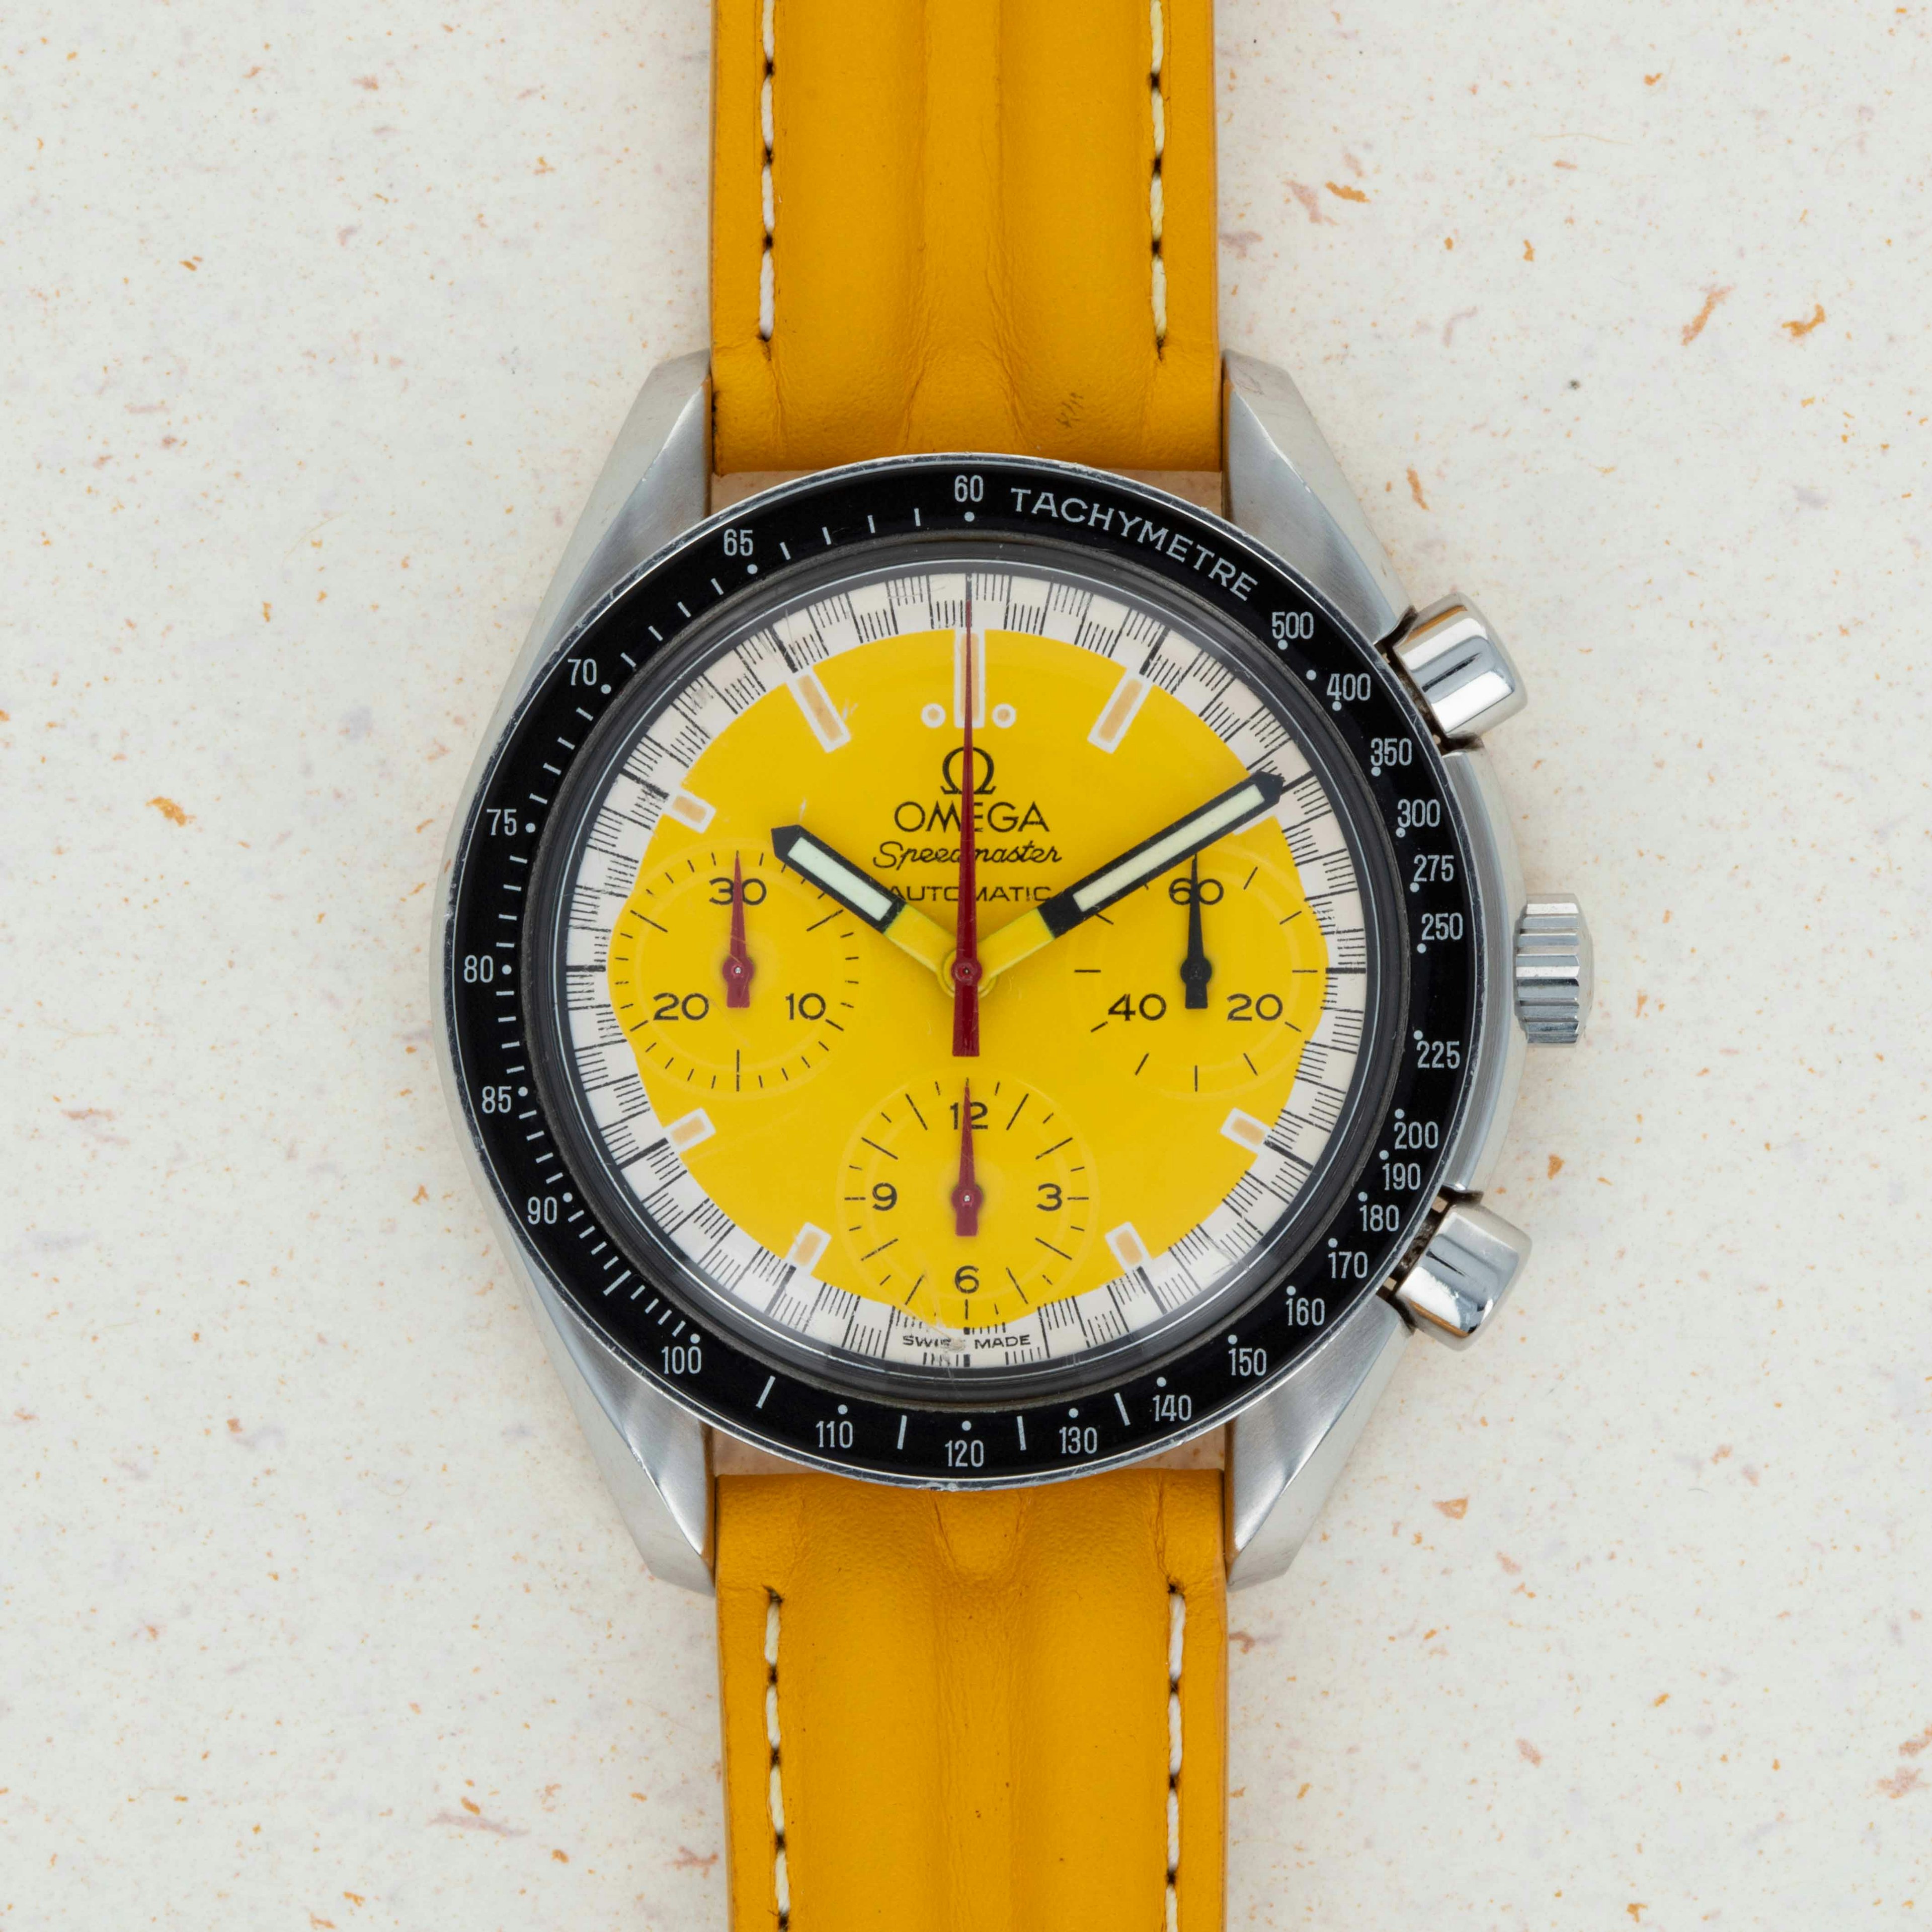 Thumbnail for Omega Speedmaster Reduced 3810.12.40 Michael Schumacher Yellow Dial with Guarantee